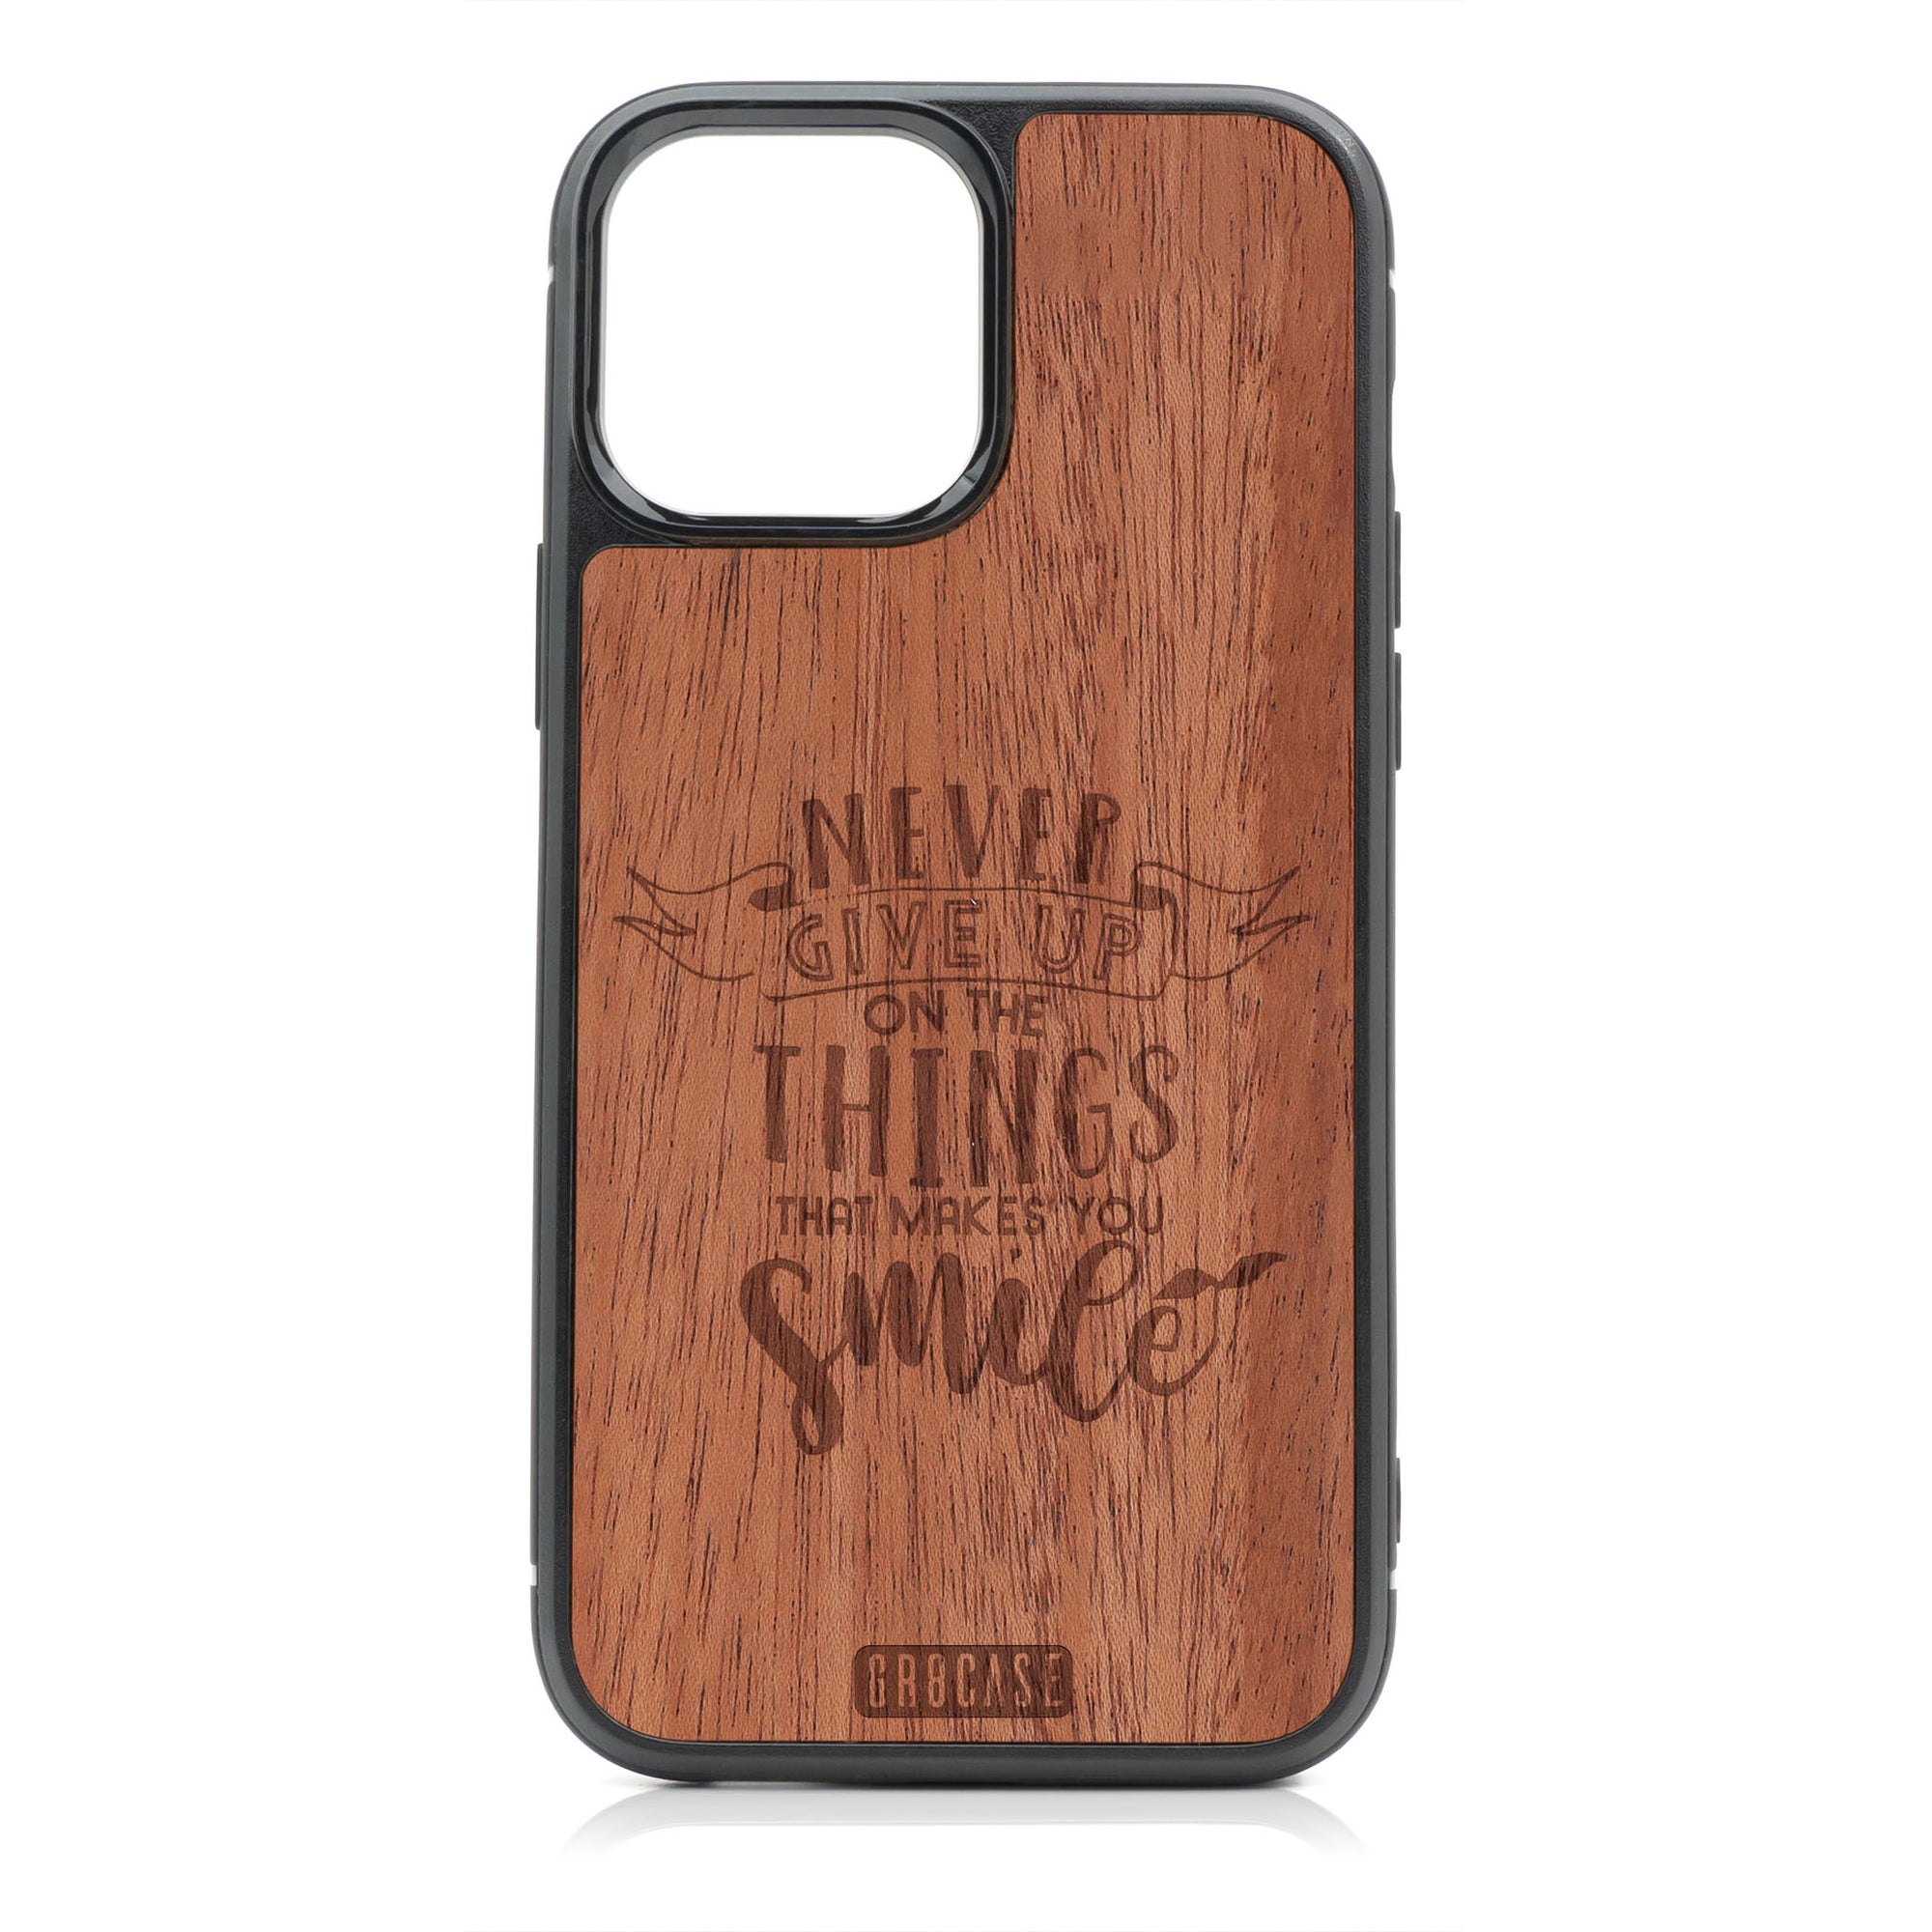 Never Give Up On The Things That Make You Smile Design Wood Case For iPhone 13 Pro Max